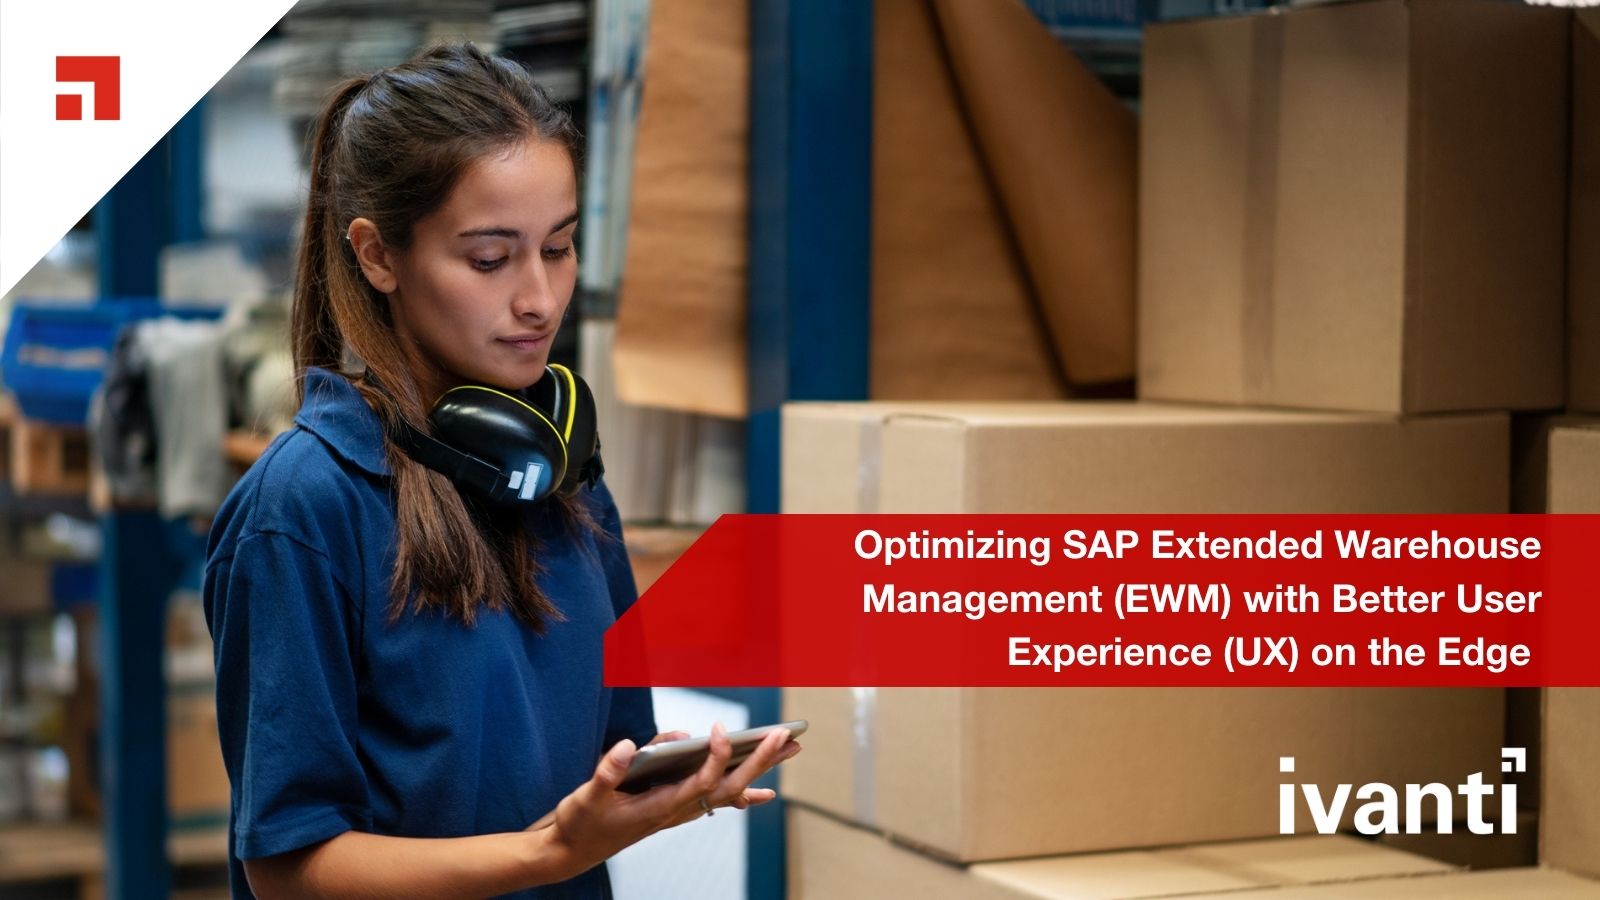 Optimizing SAP Extended Warehouse Management (EWM) with Better User Experience (UX) on the Edge 